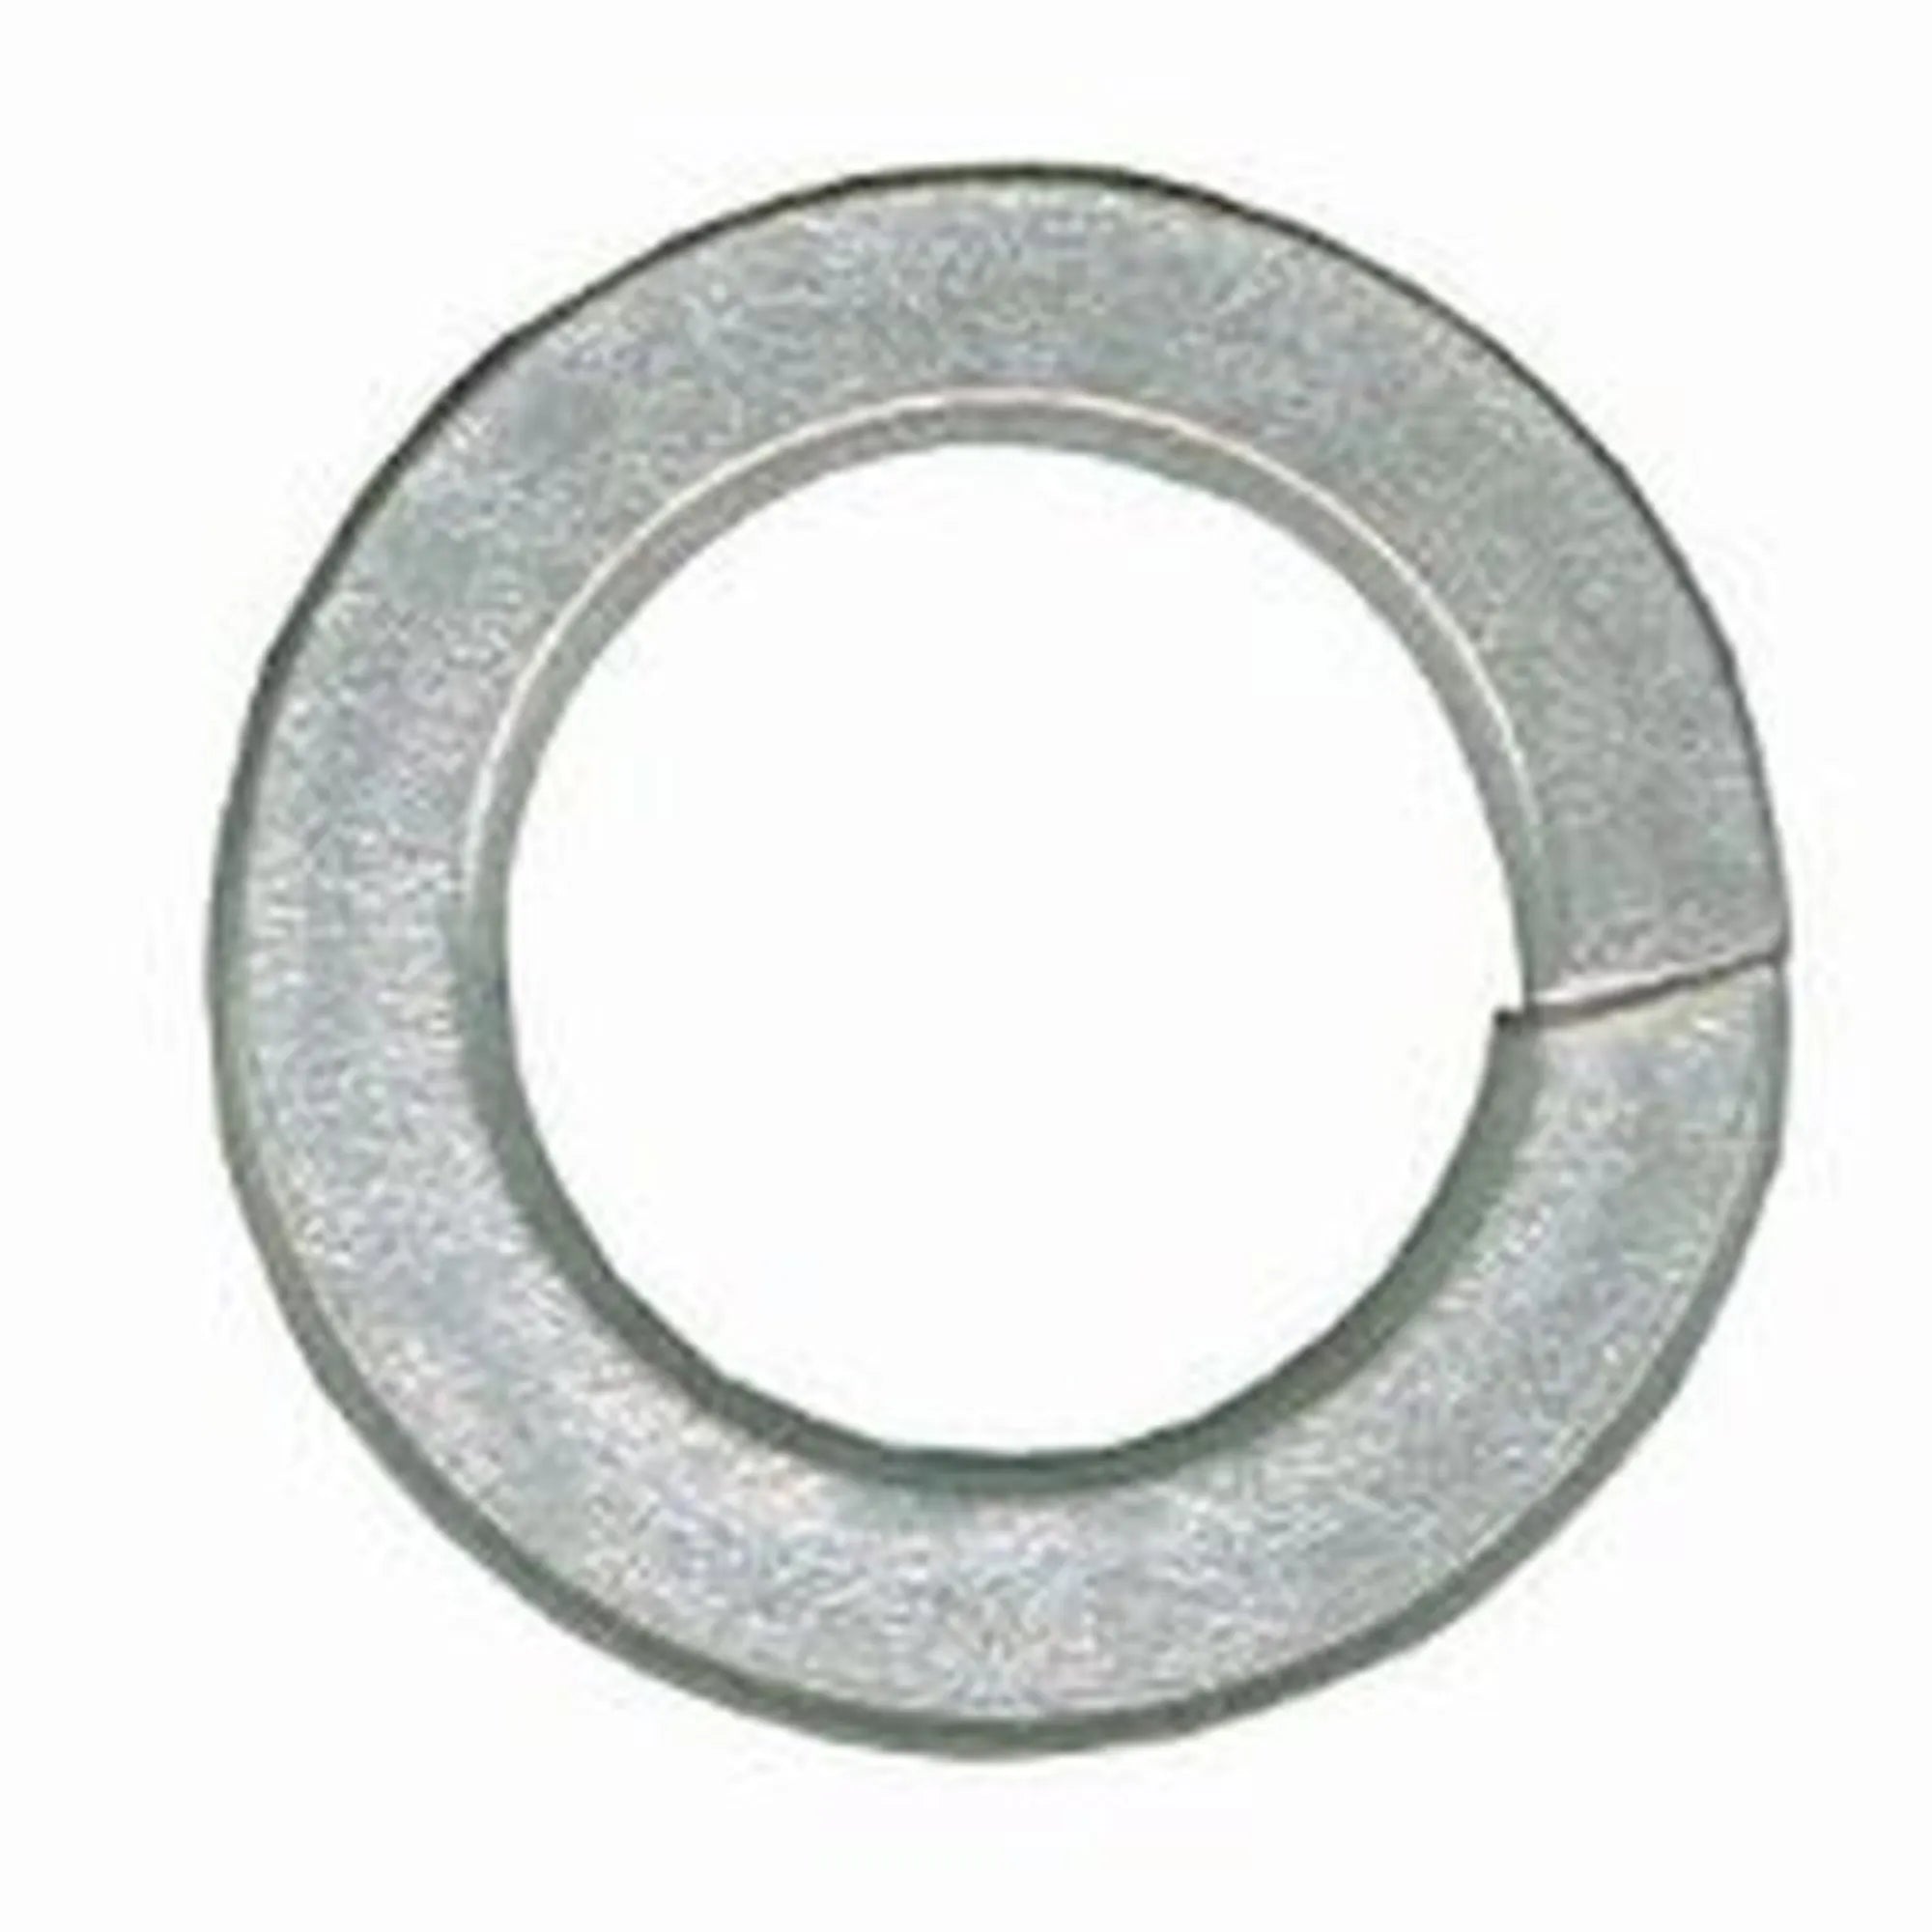 A4 S/S Spring Coil Washers